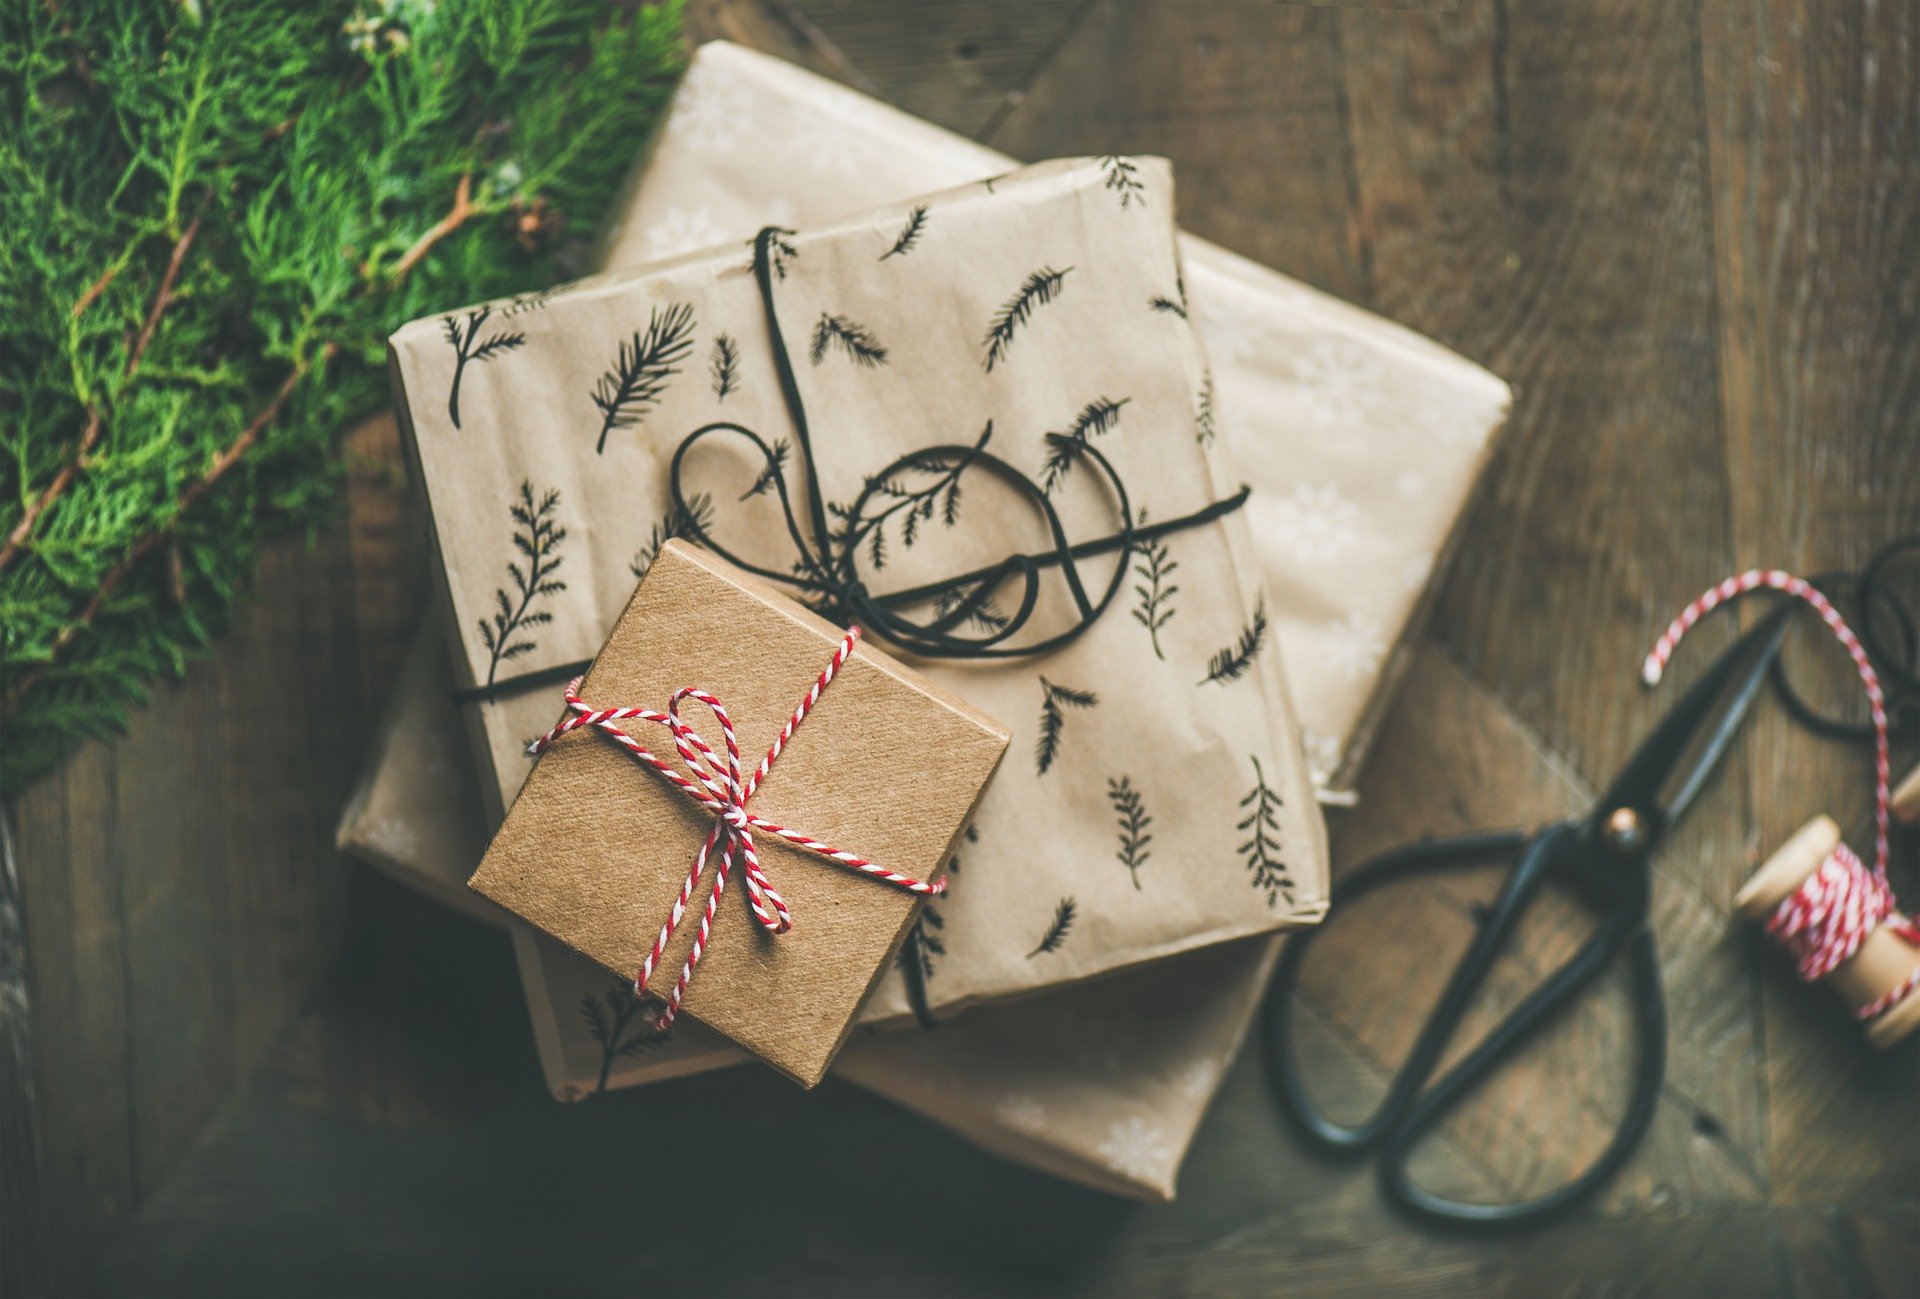 2020 Creative Gift Ideas for Writers - Writer's Digest